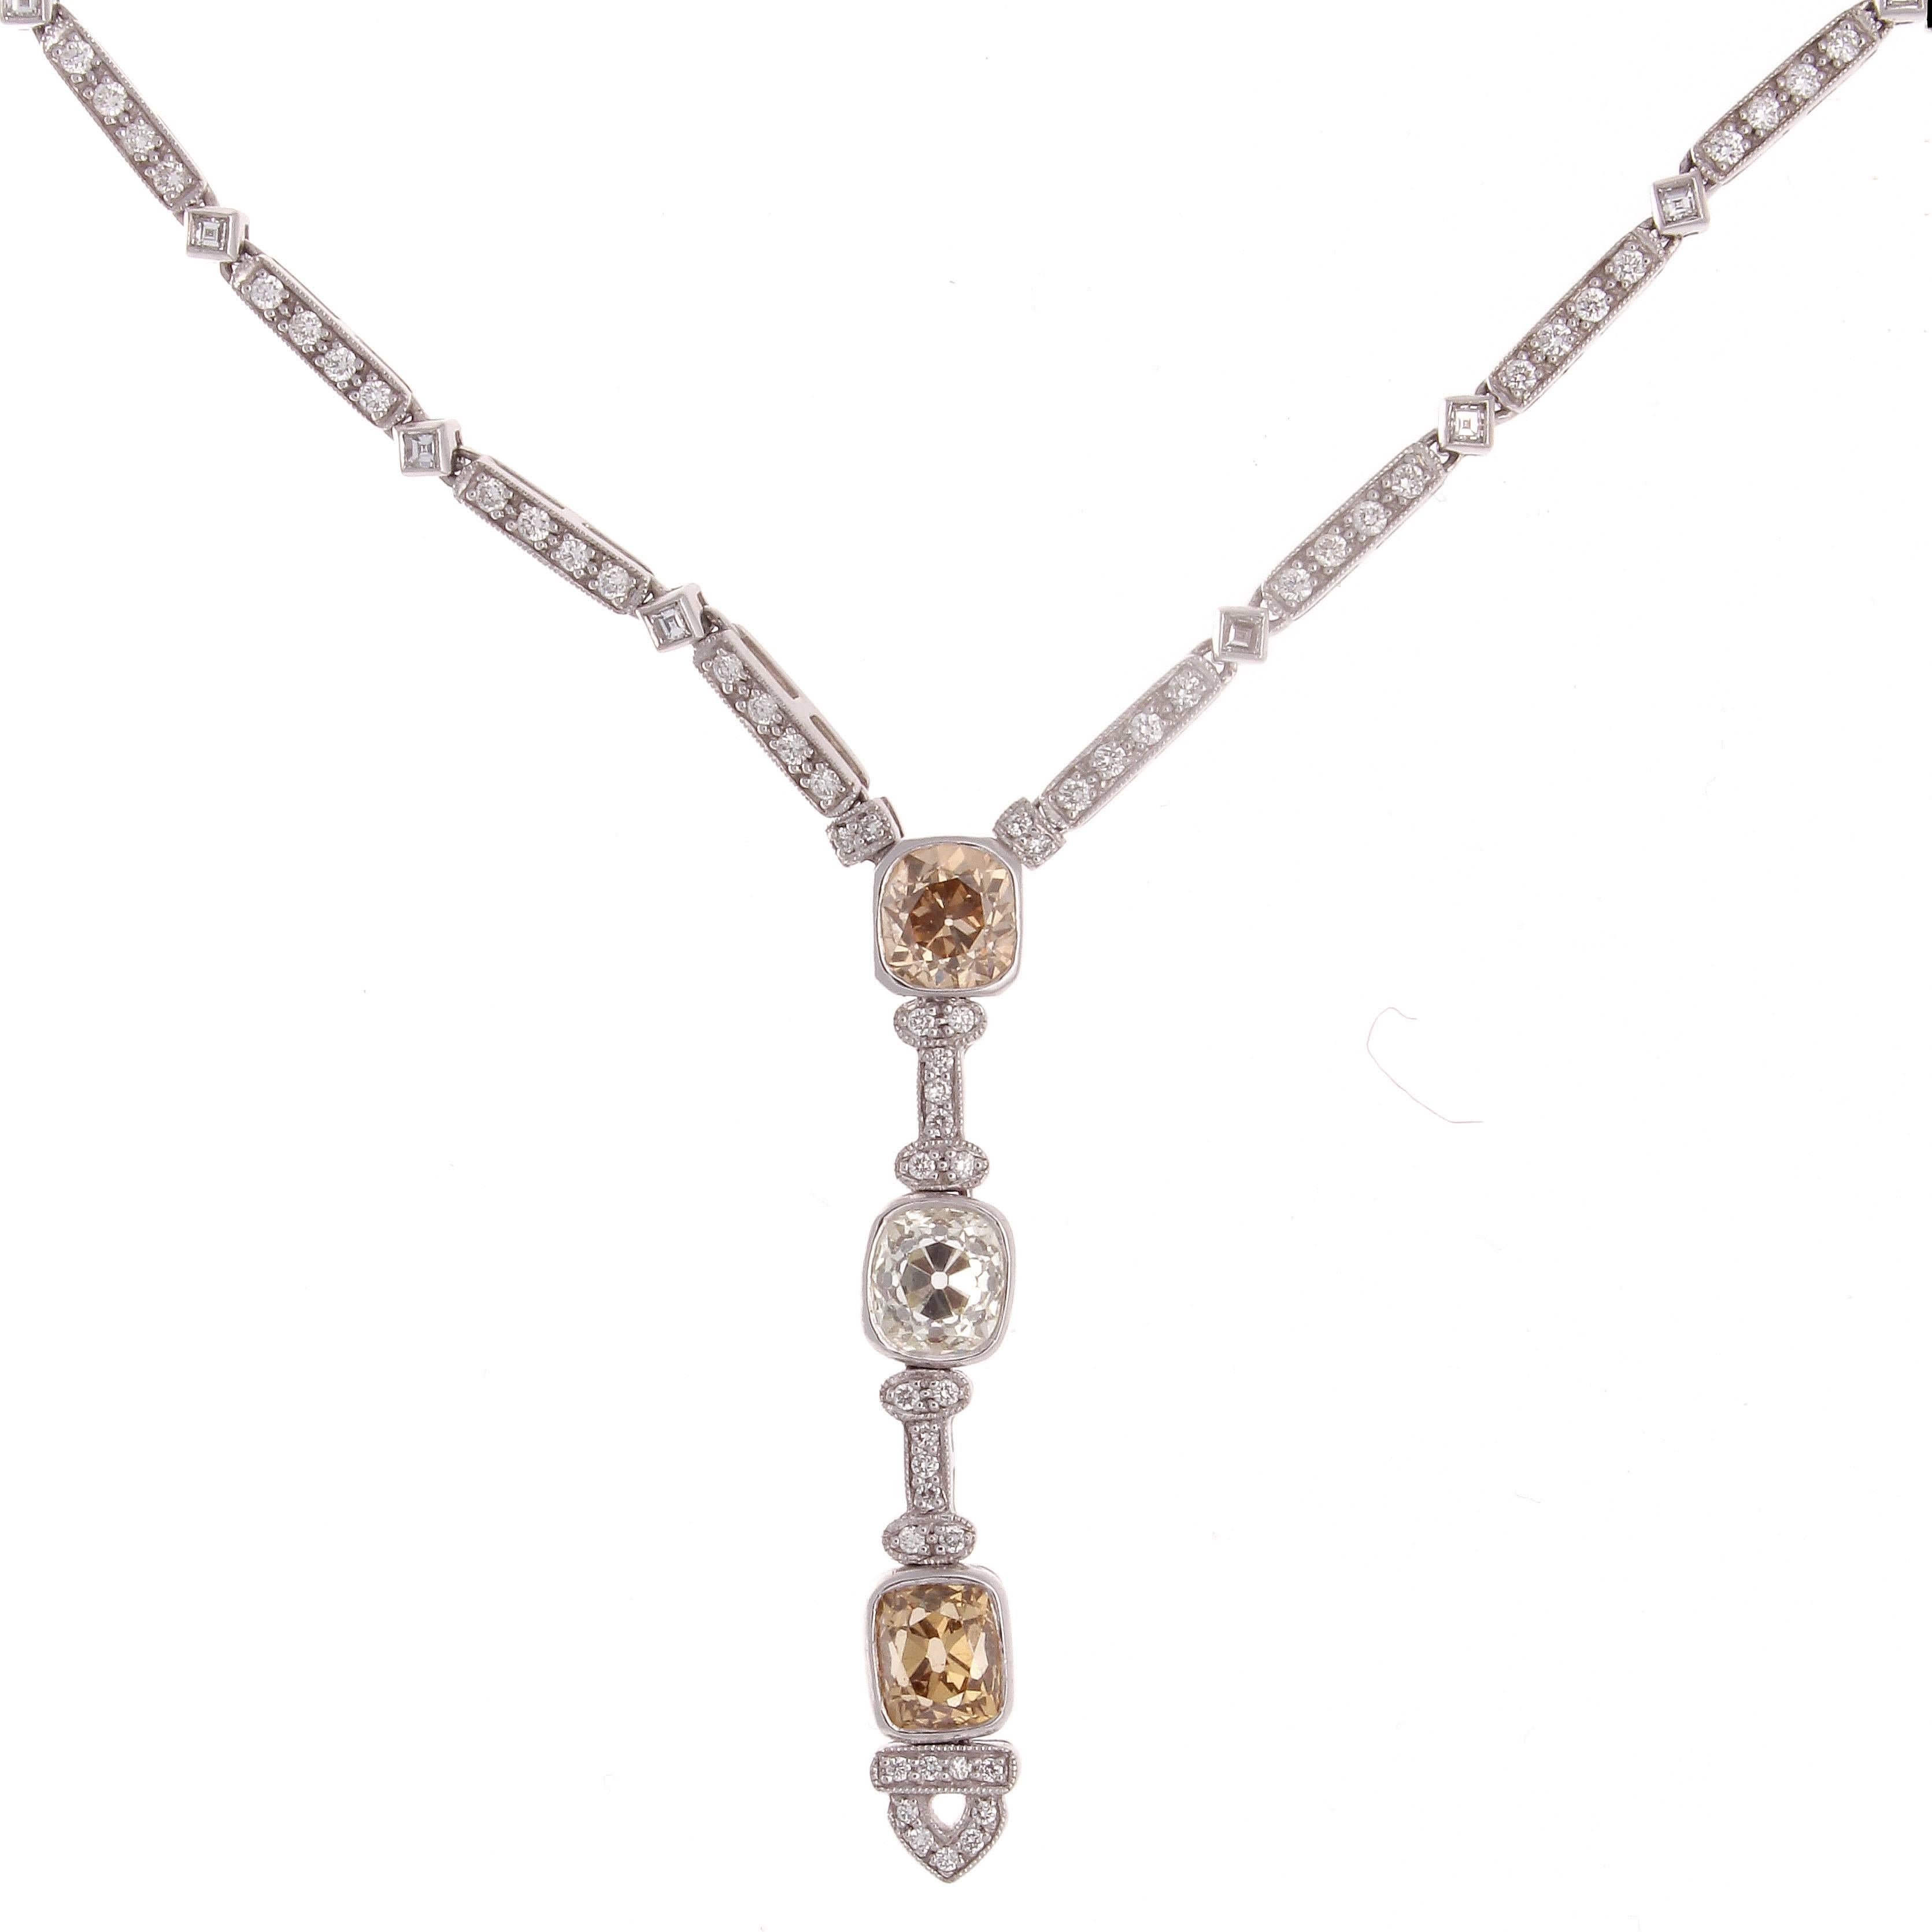 A beautifully articulated idea crafted into reality. Sophia D intertwines modern techniques but stays true to their inspiration which comes from the timeless designs of the art deco time period. 

The diamond filled necklace elegantly drops in to